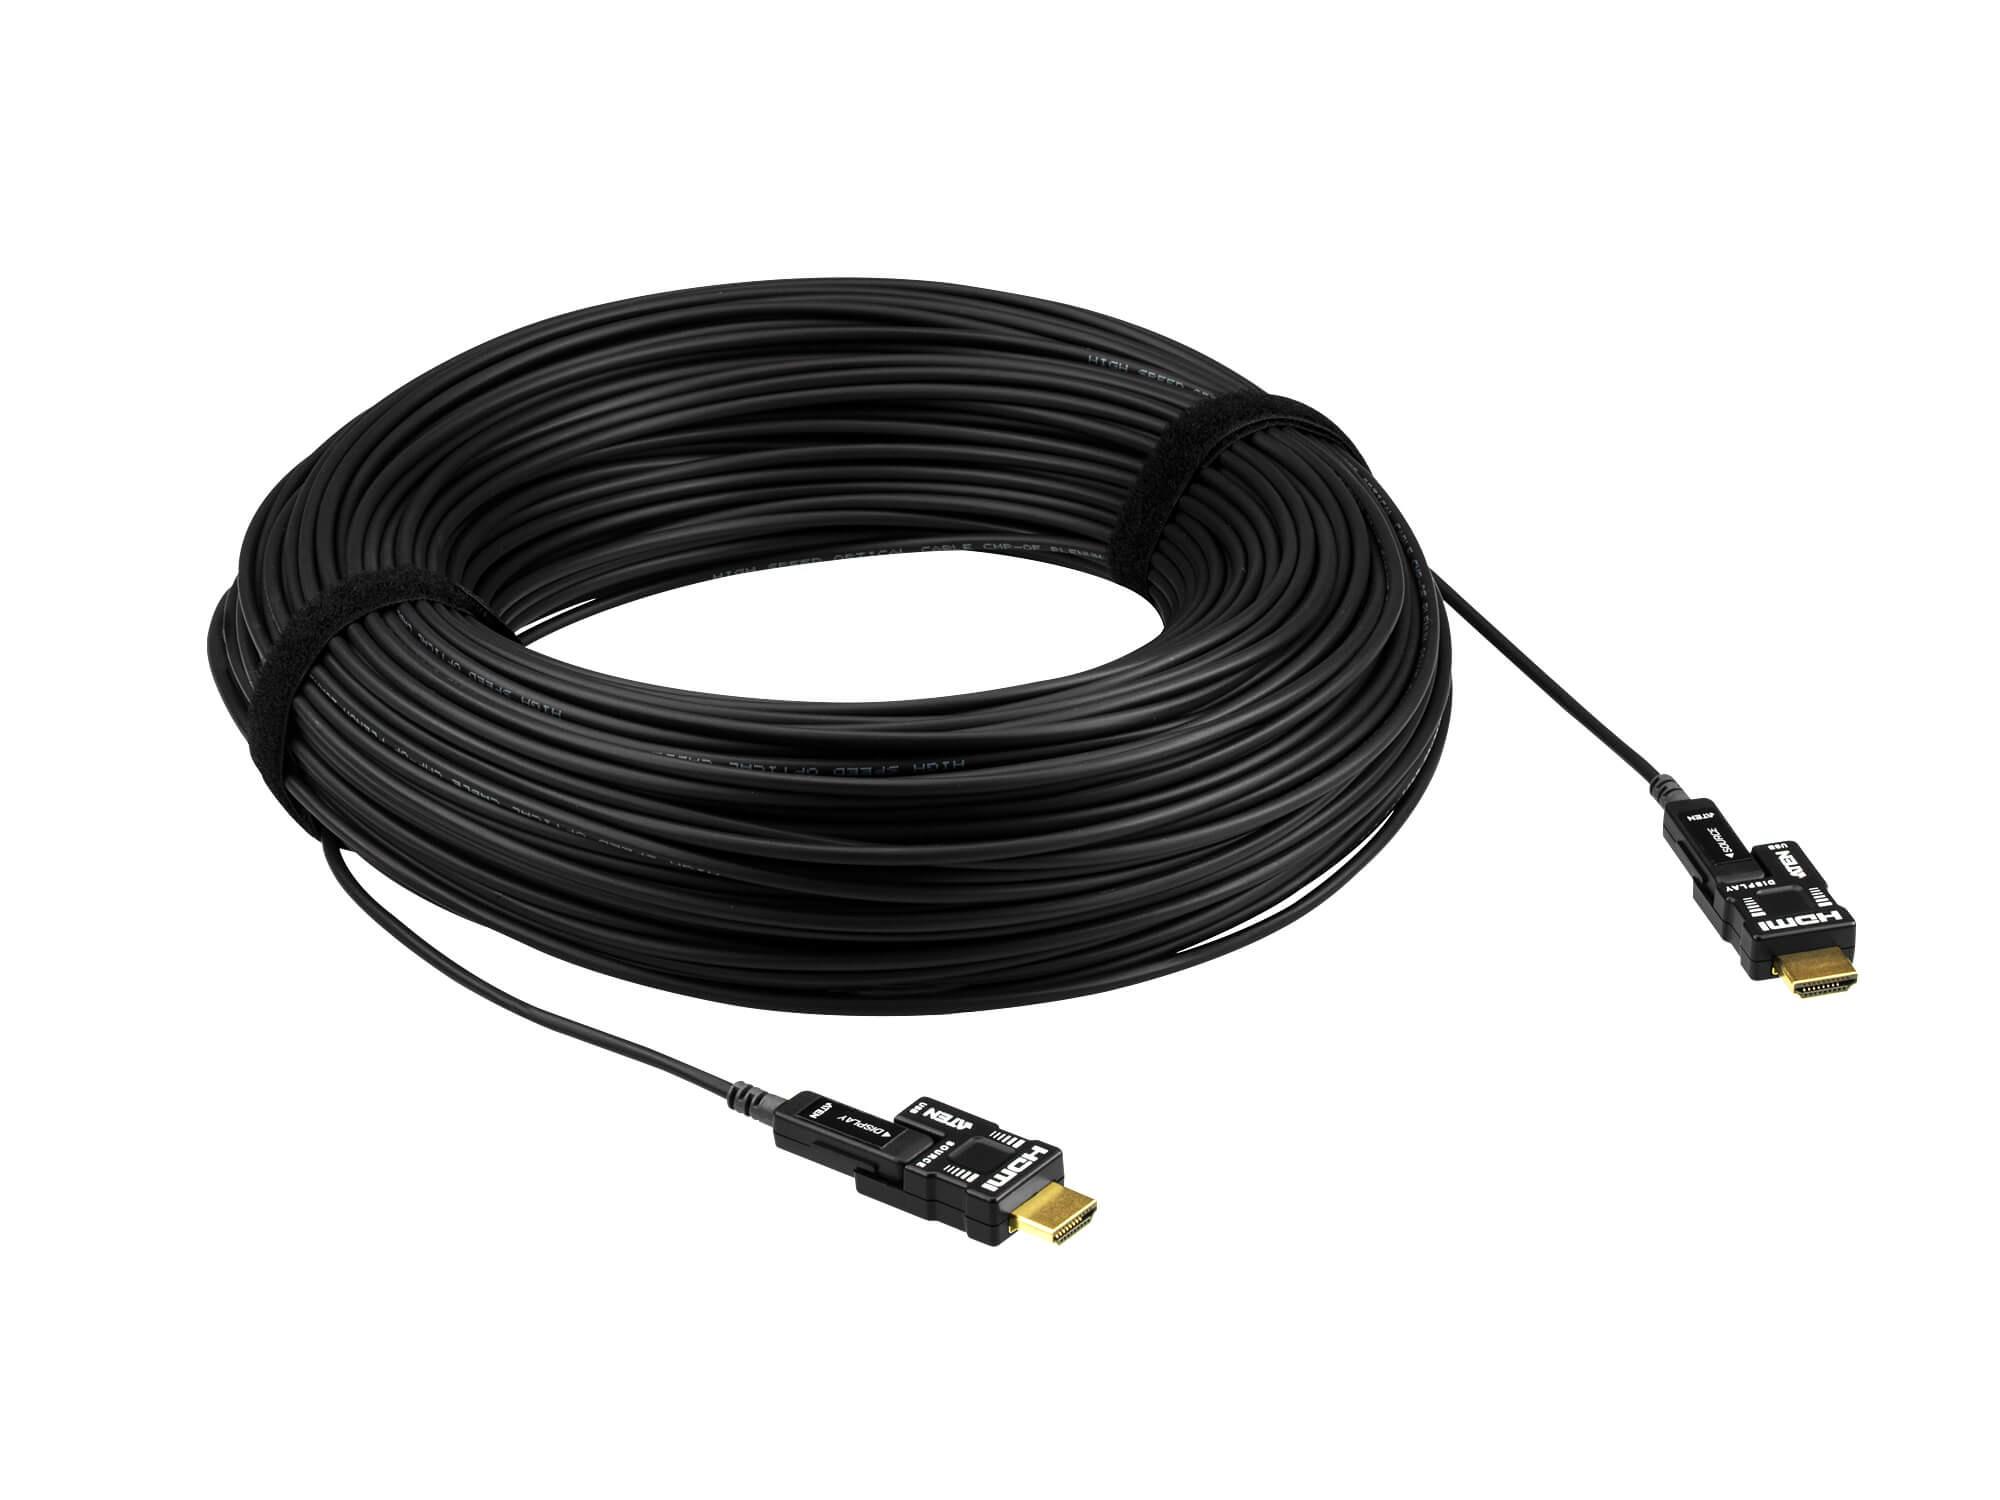 VE7834 60m True 4K HDMI 2.0 Active Optical Cable by Aten